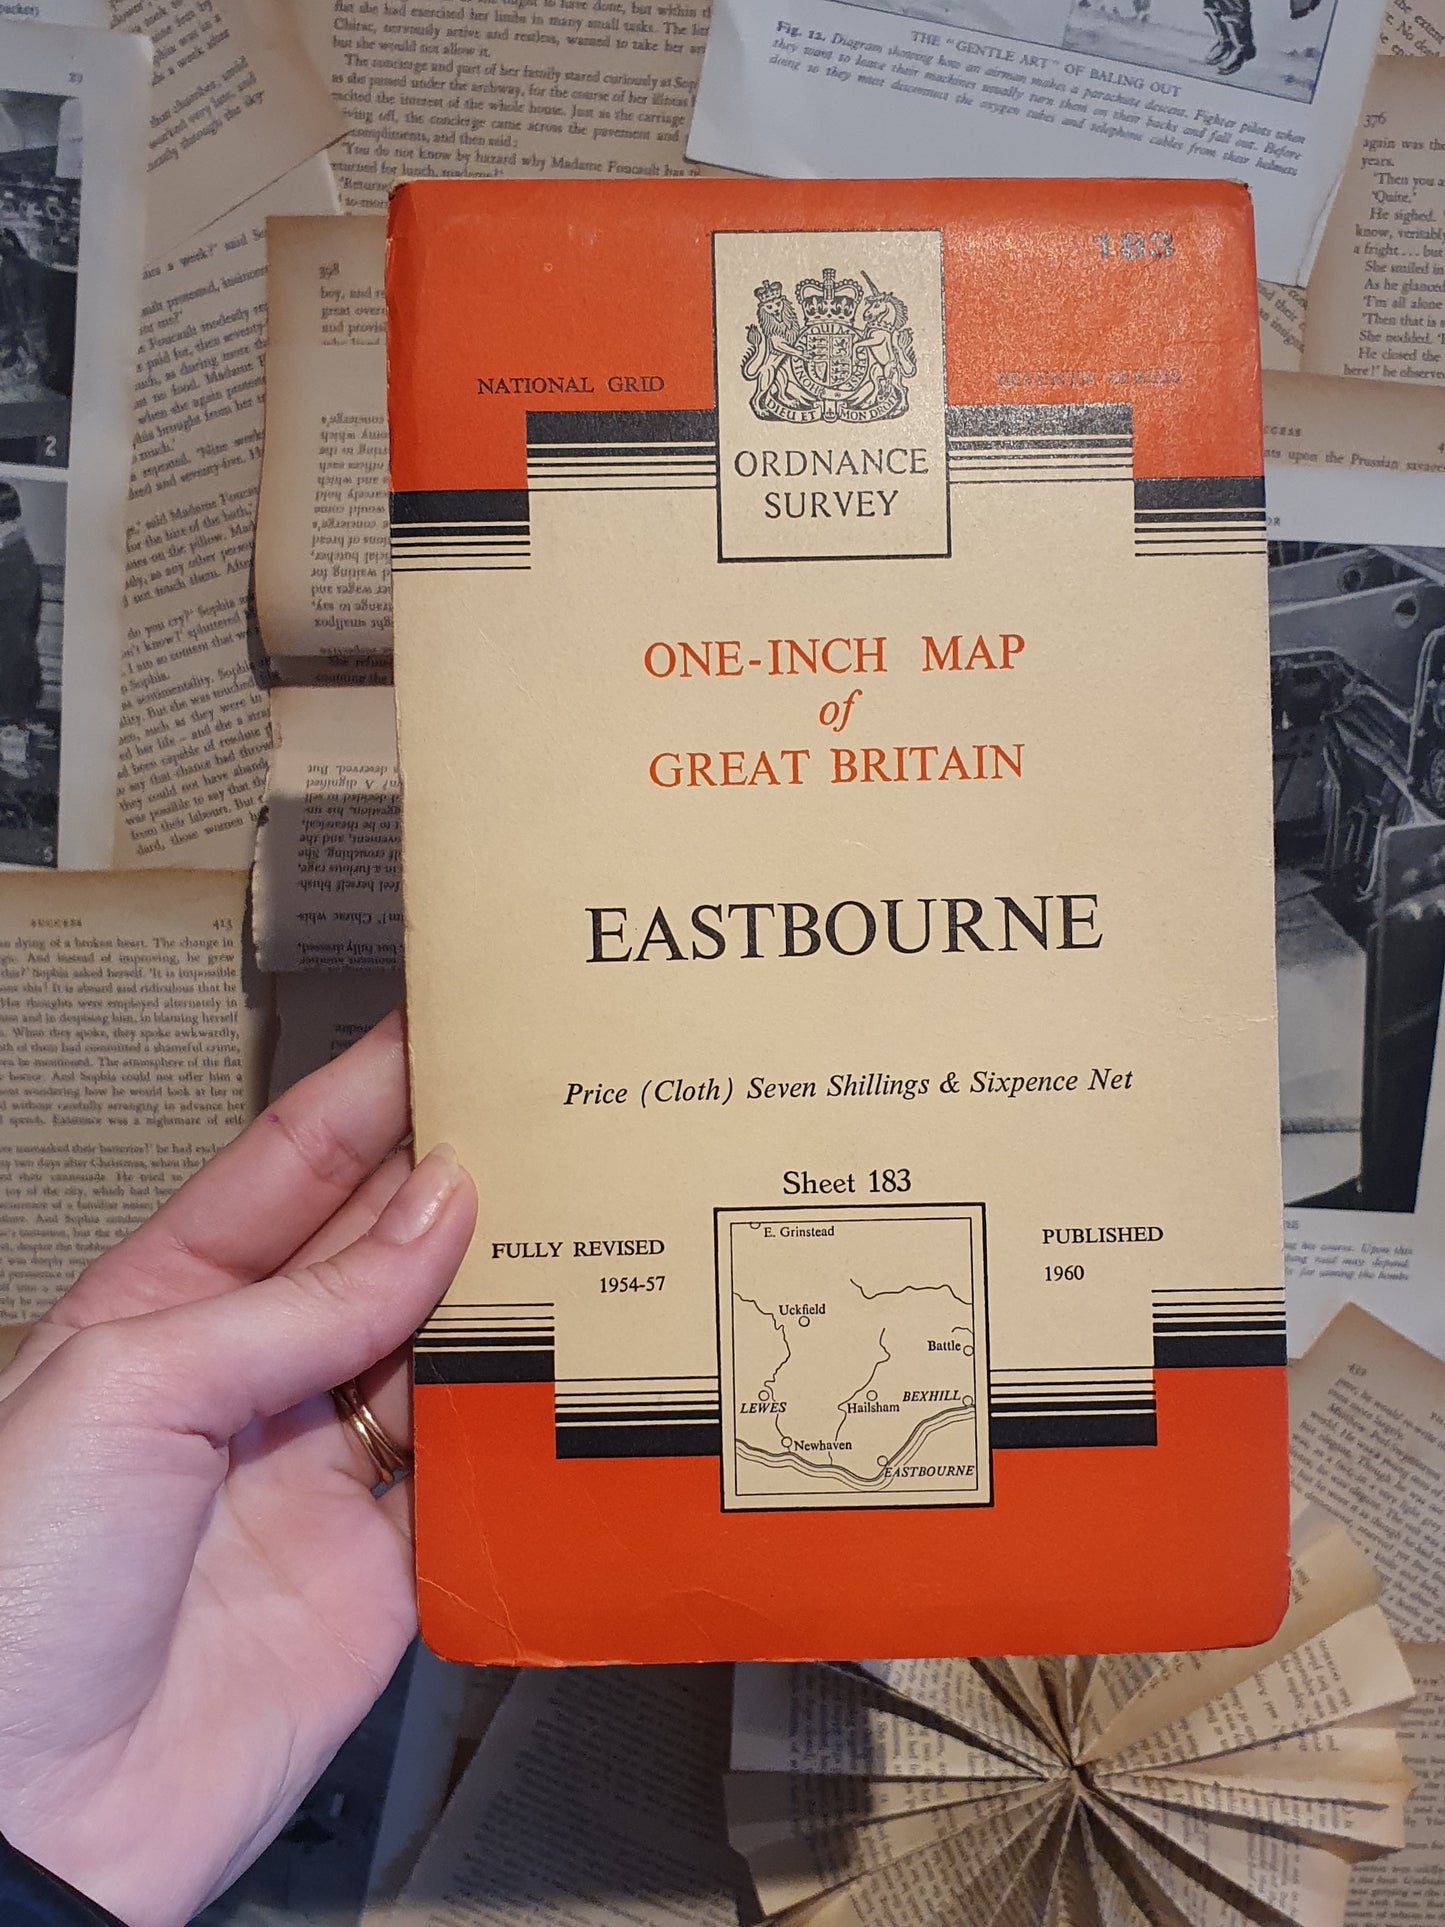 Ordnance Survey One-Inch Map of Great Britain - Eastbourne (Sheet 183) Cloth